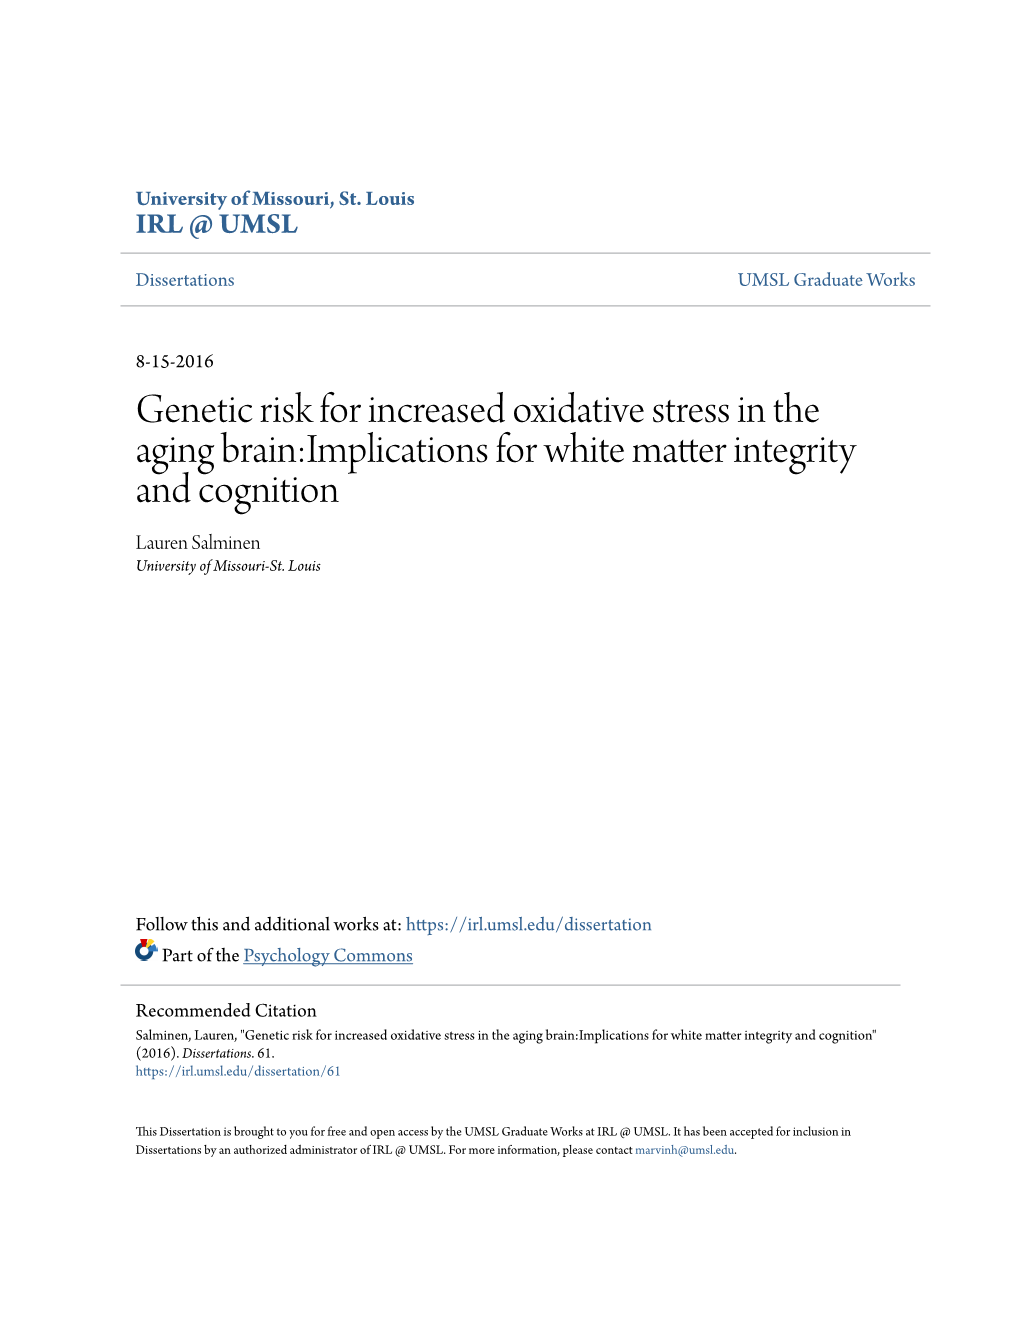 Genetic Risk for Increased Oxidative Stress in the Aging Brain:Implications for White Matter Integrity and Cognition Lauren Salminen University of Missouri-St